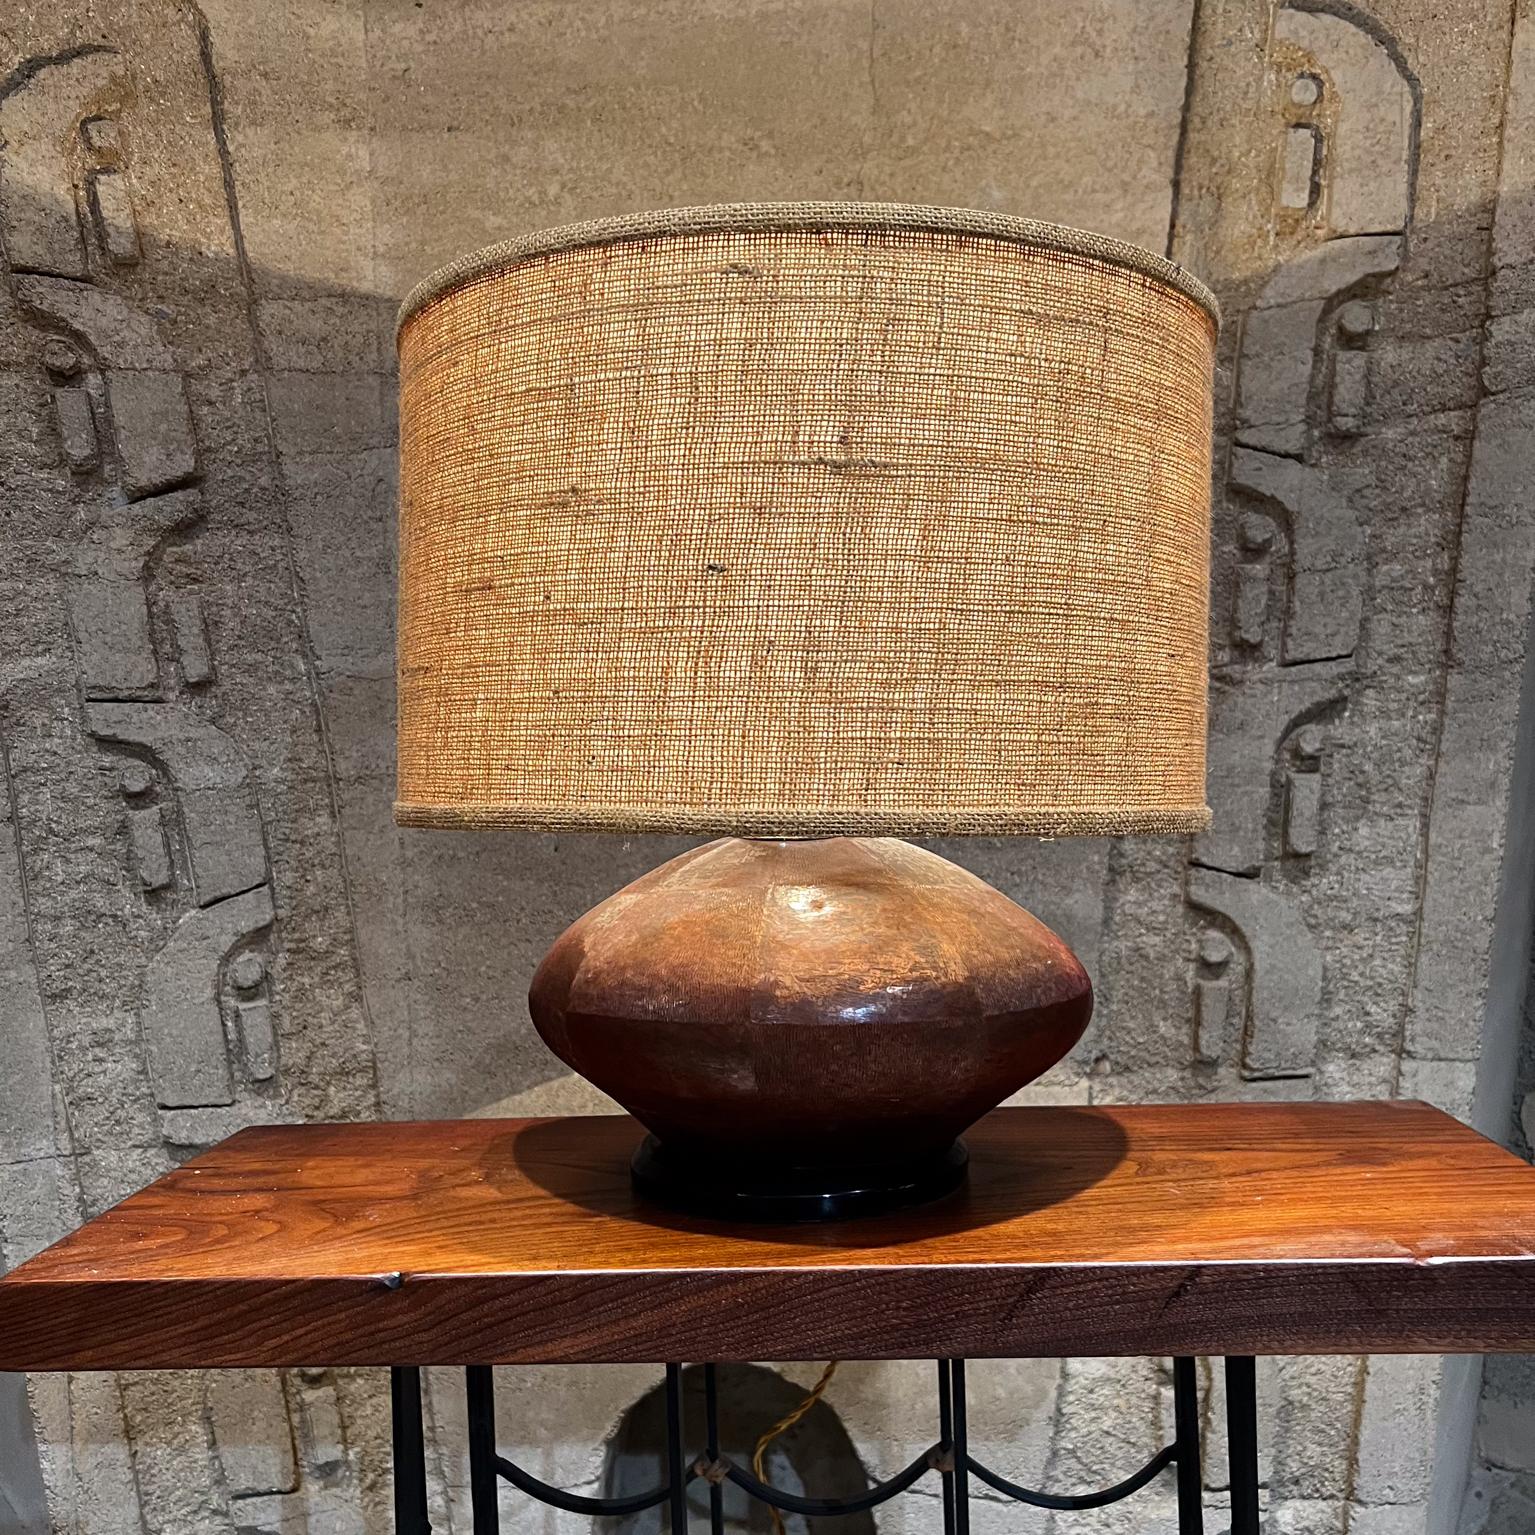 1970s Handmade Texturized Table Lamp Patinated Copper Mexico.
Style of Luis Barragan and Santa Clara de Cobre, Michoacan
Bent wood base painted black.
Brass hardware.
Lamp is fat oval shape.
19 T x 14.5 W x 11.5 D
Original Vintage Preowned